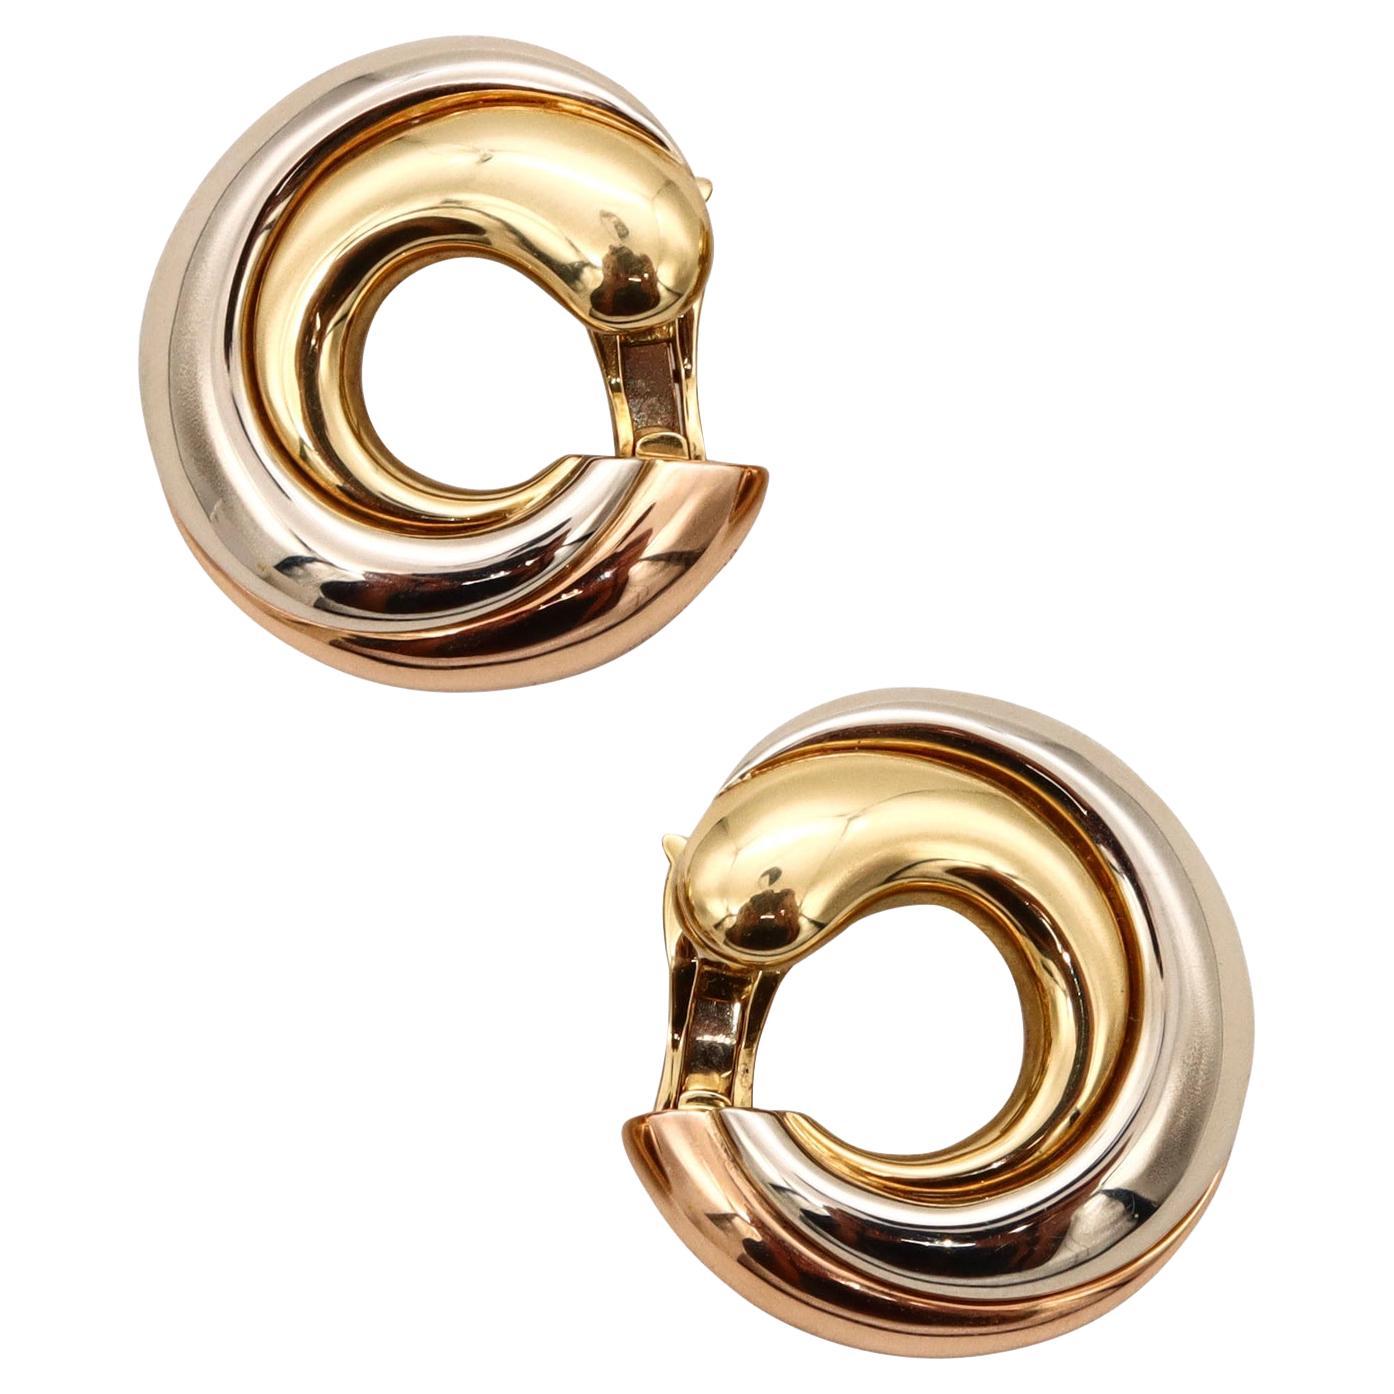 Cartier Paris Vintage Large C Trinity Clip Earrings in Solid 18Kt Tricolor Gold